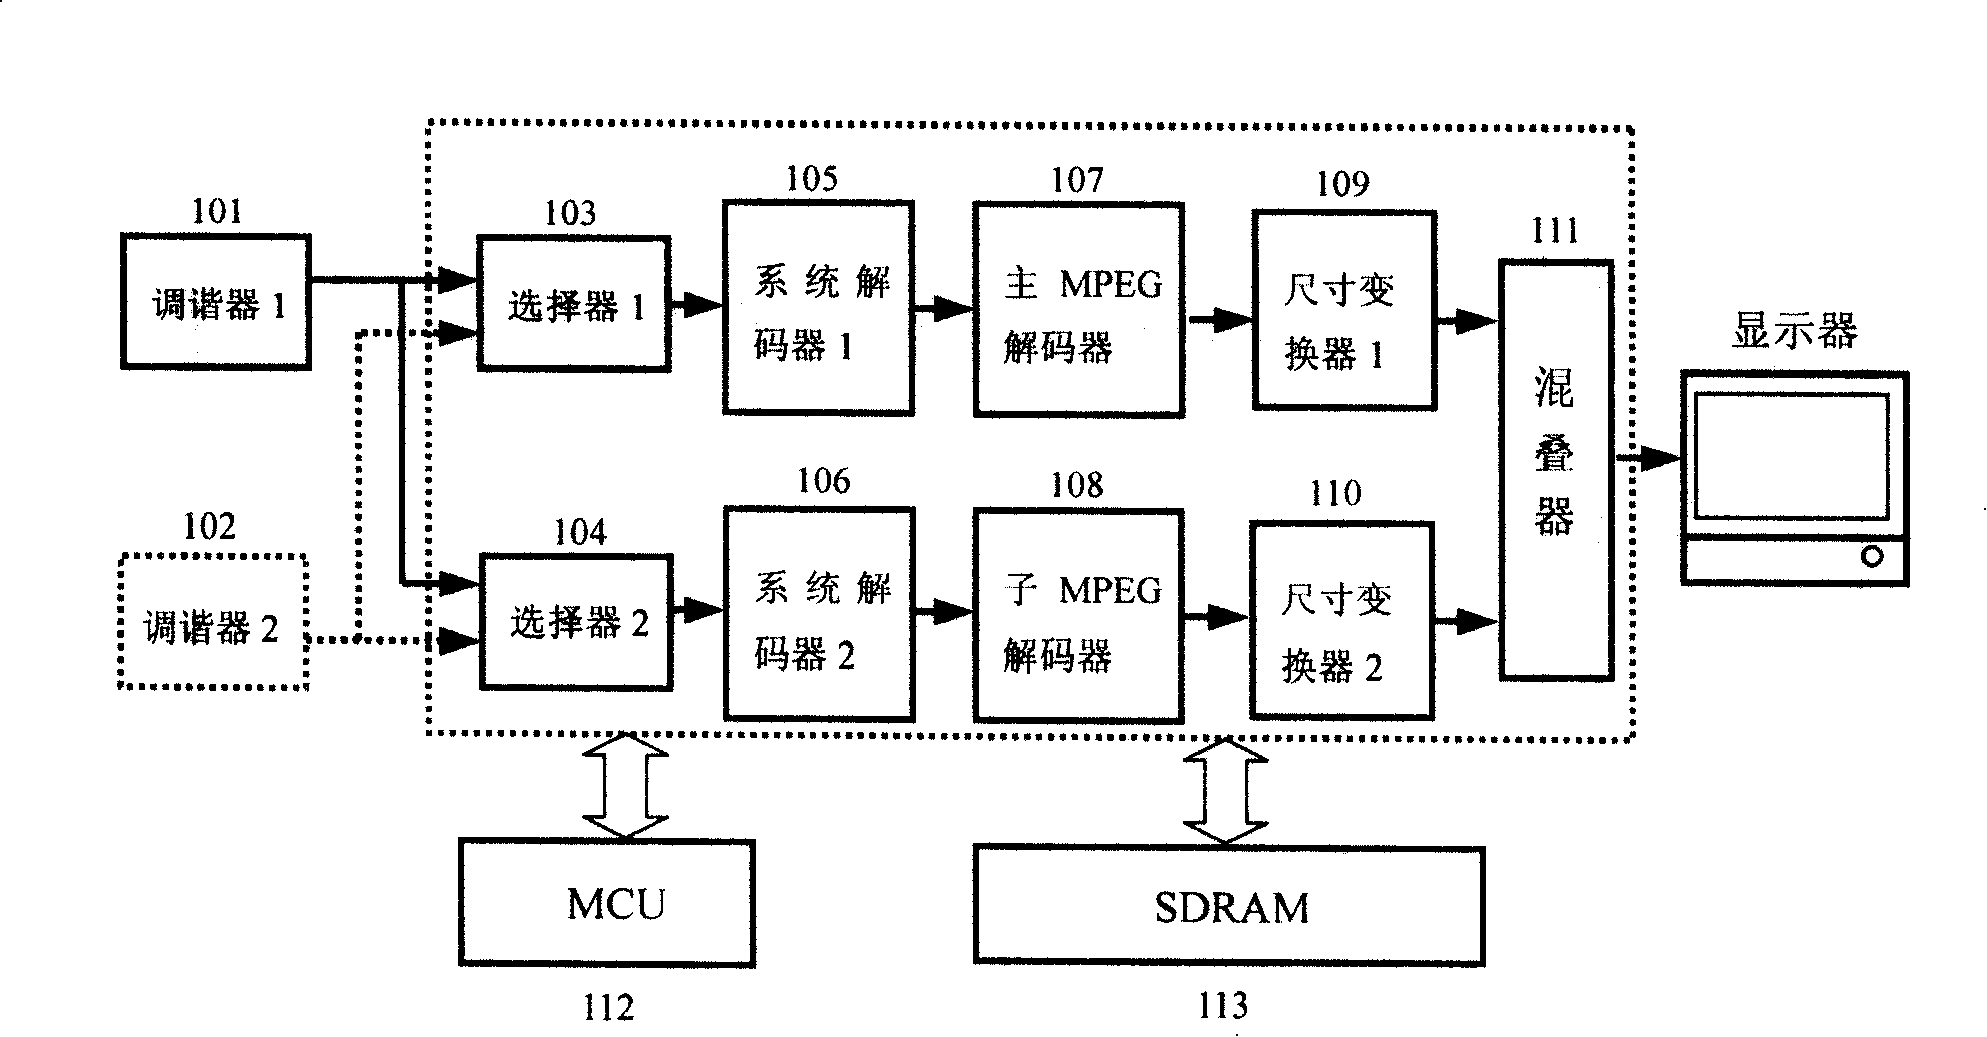 Apparatus and method for multi-picture dynamic condition displaying multi-path TV program contents